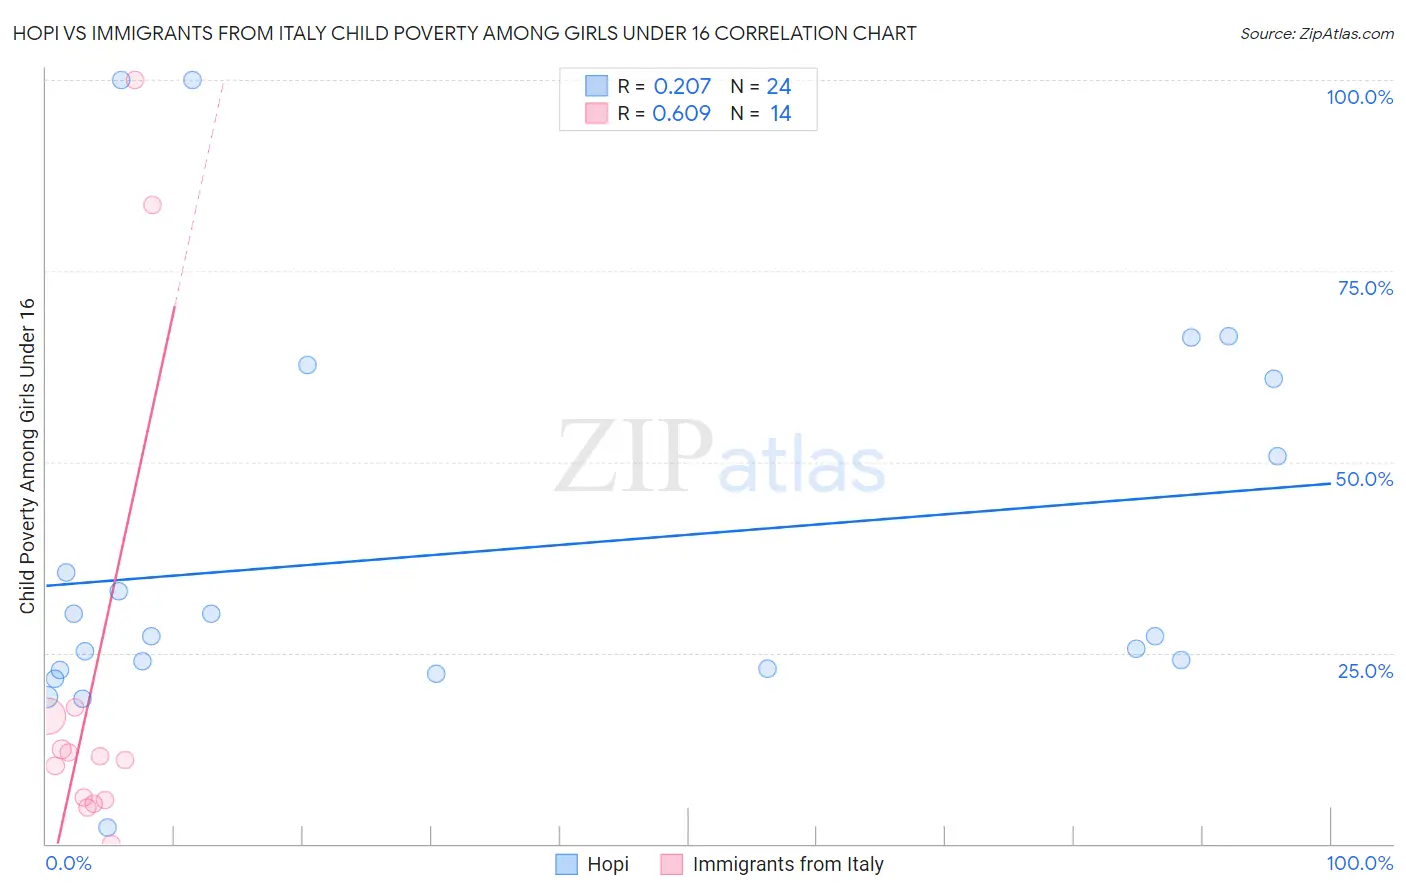 Hopi vs Immigrants from Italy Child Poverty Among Girls Under 16